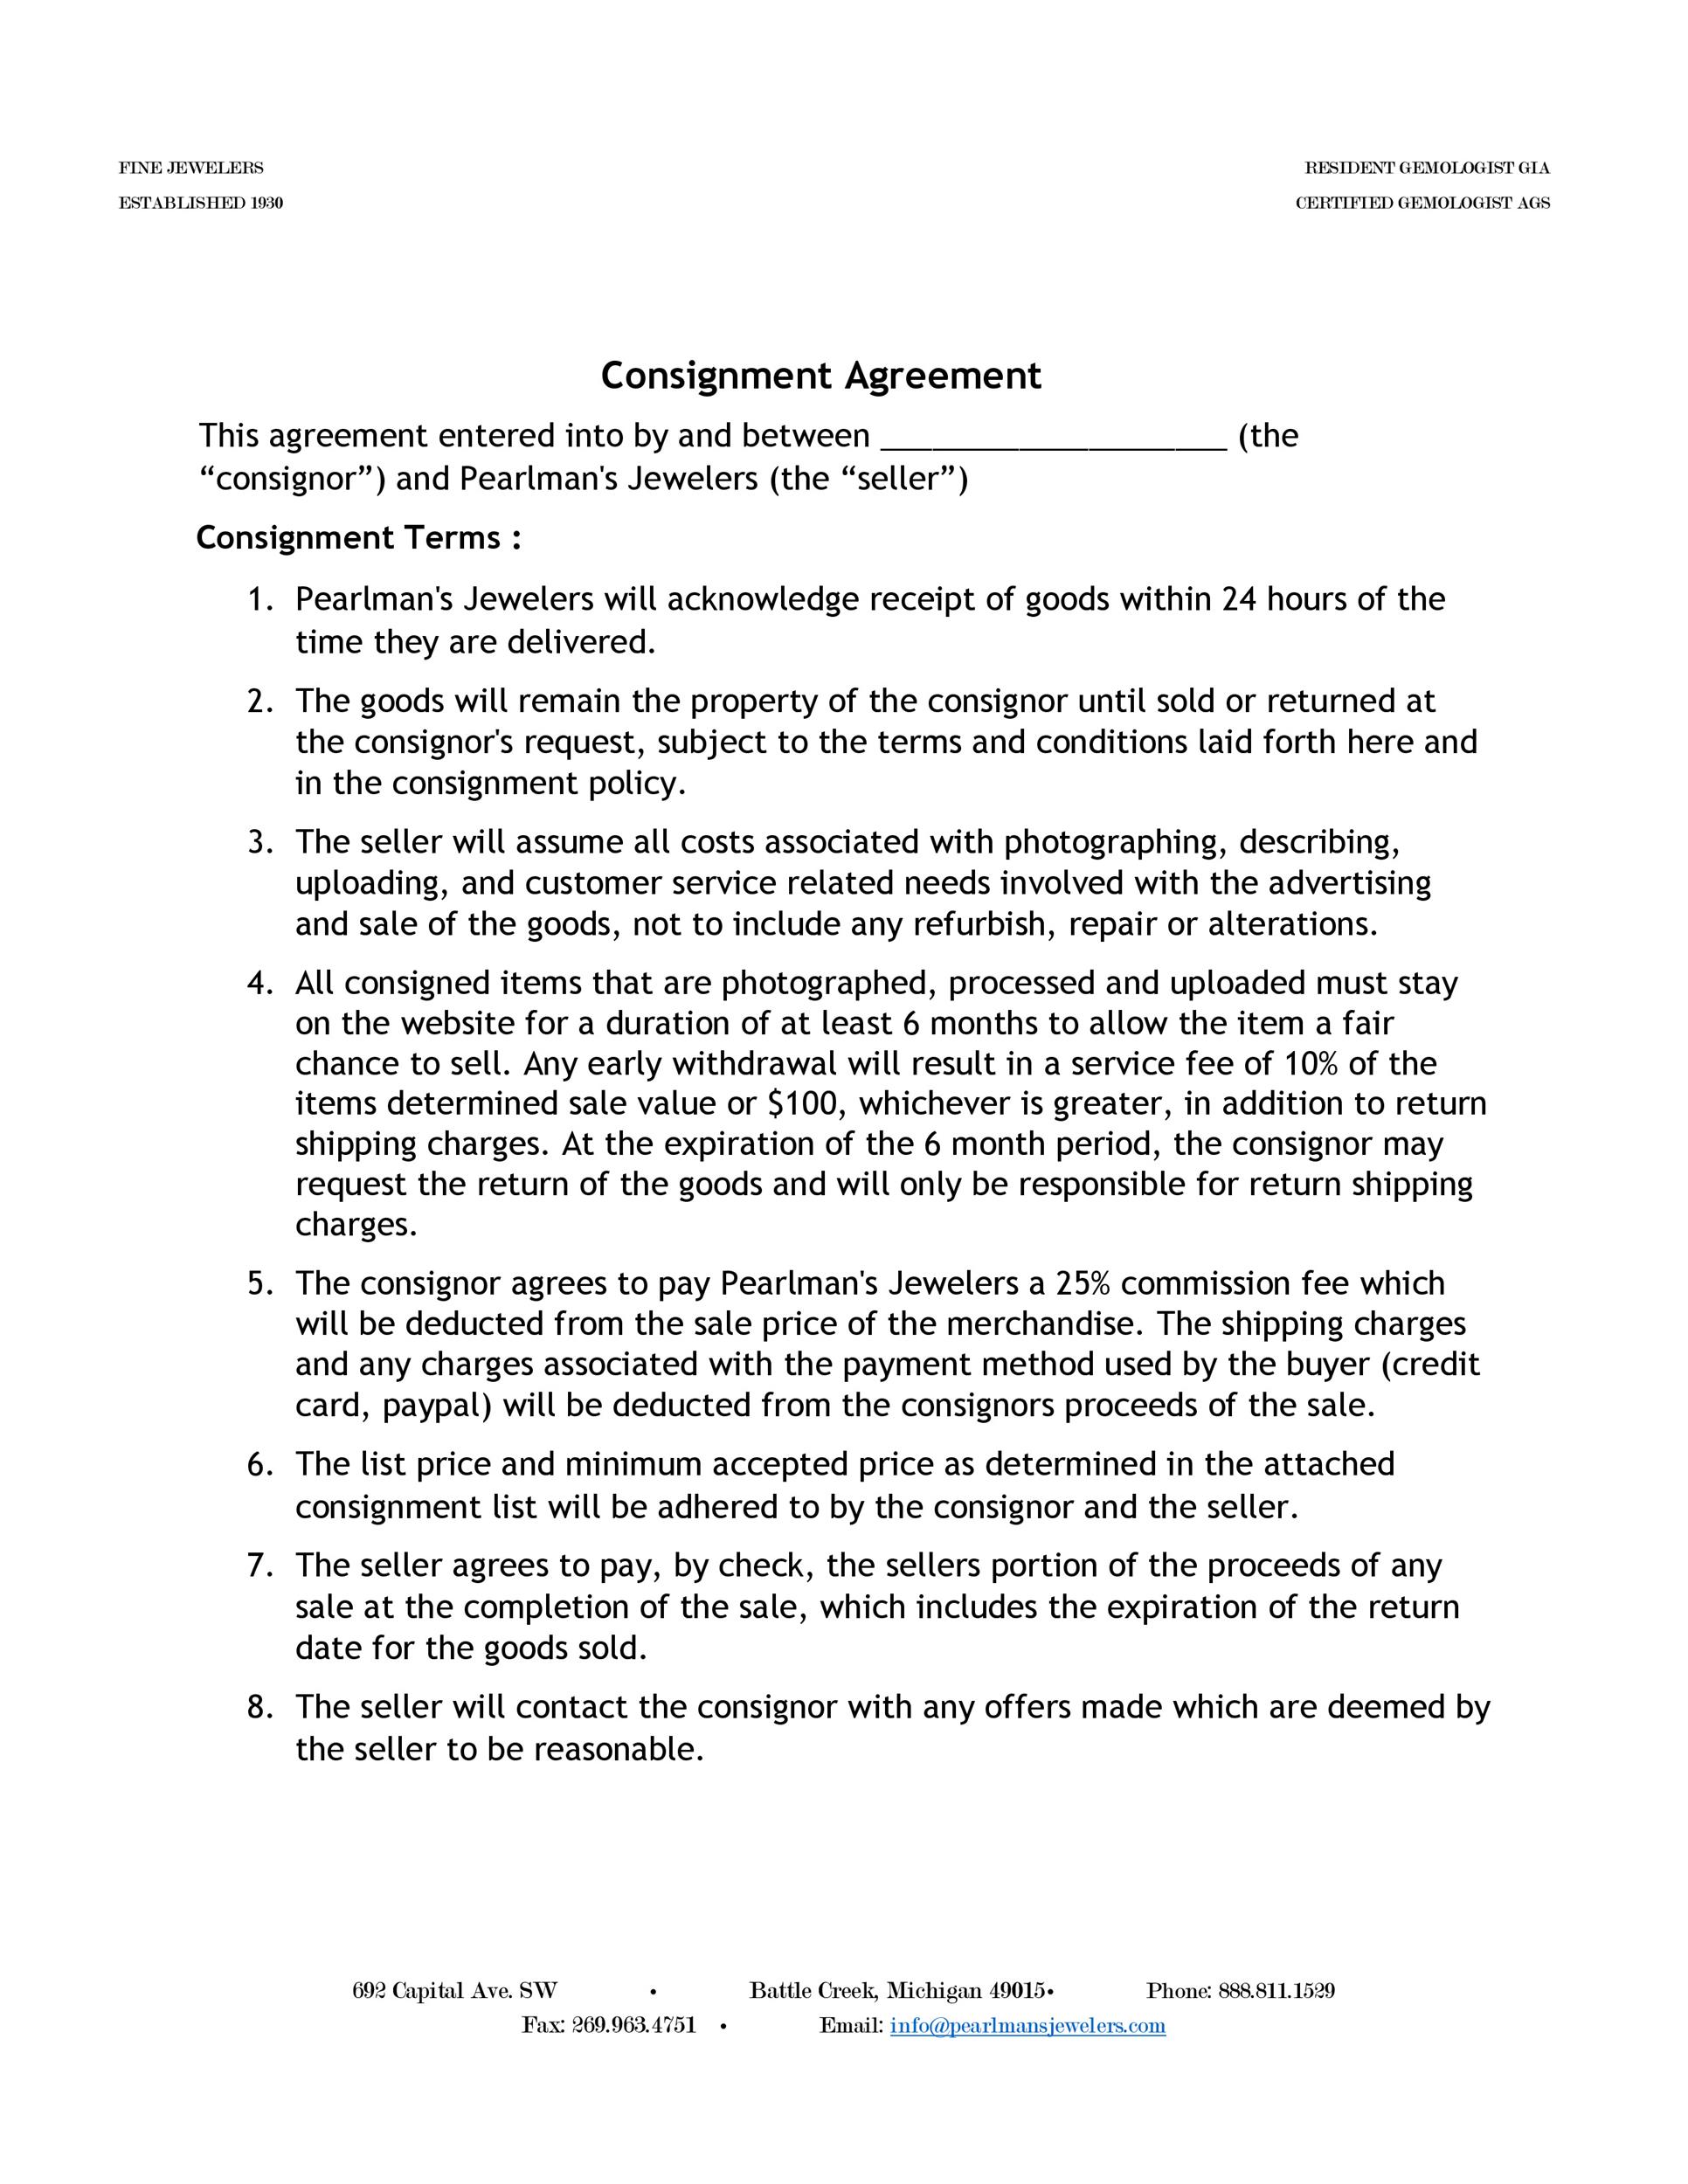 Free Consignment Agreement Template 41